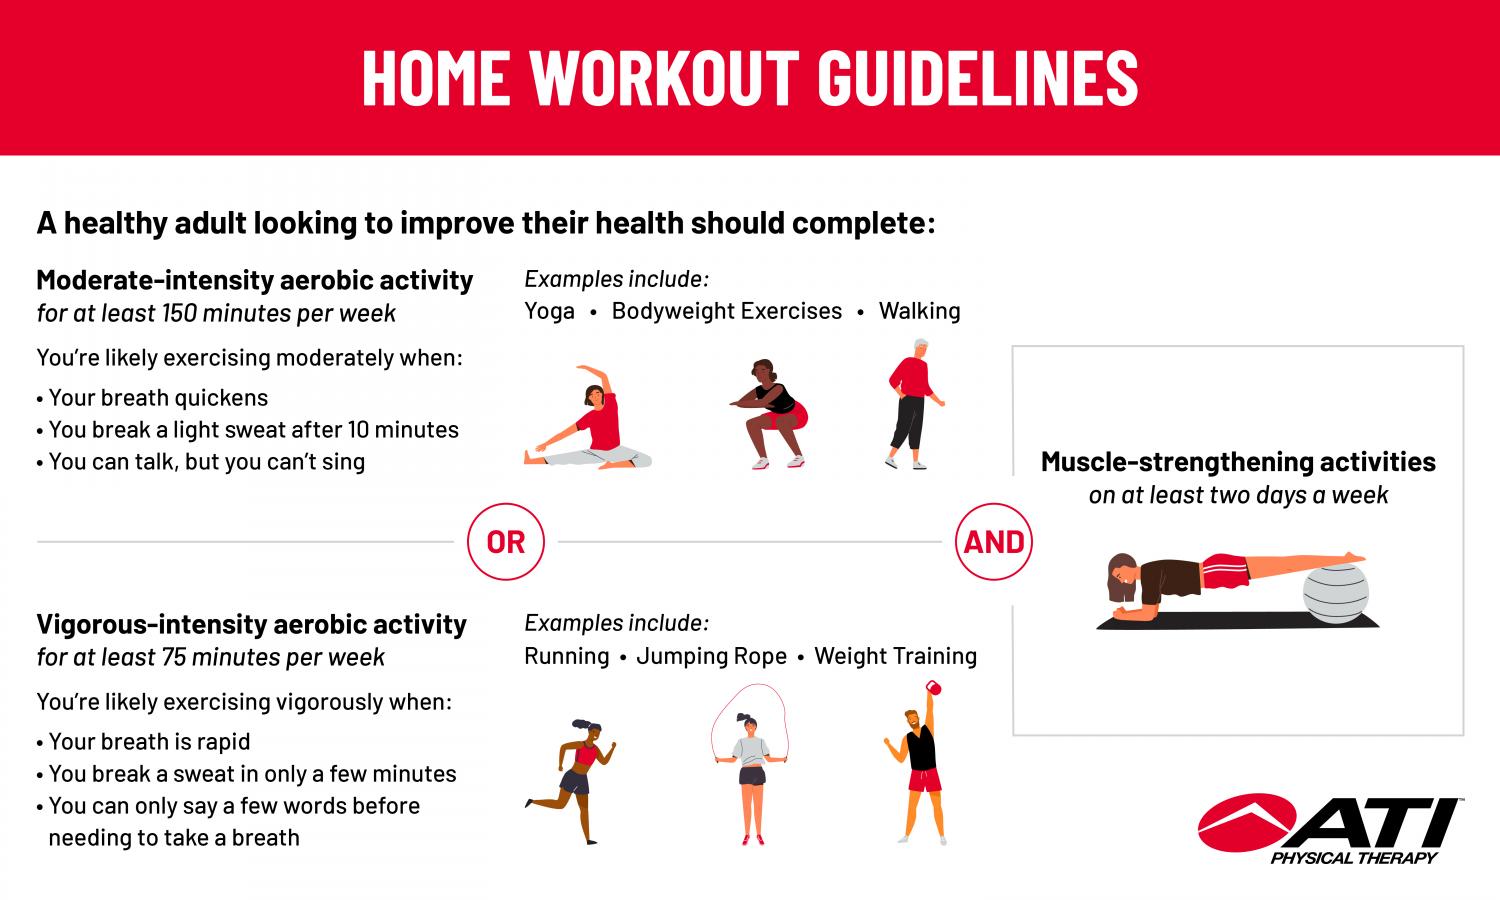 Home Workout Guidelines - How Much Should You Exercise?